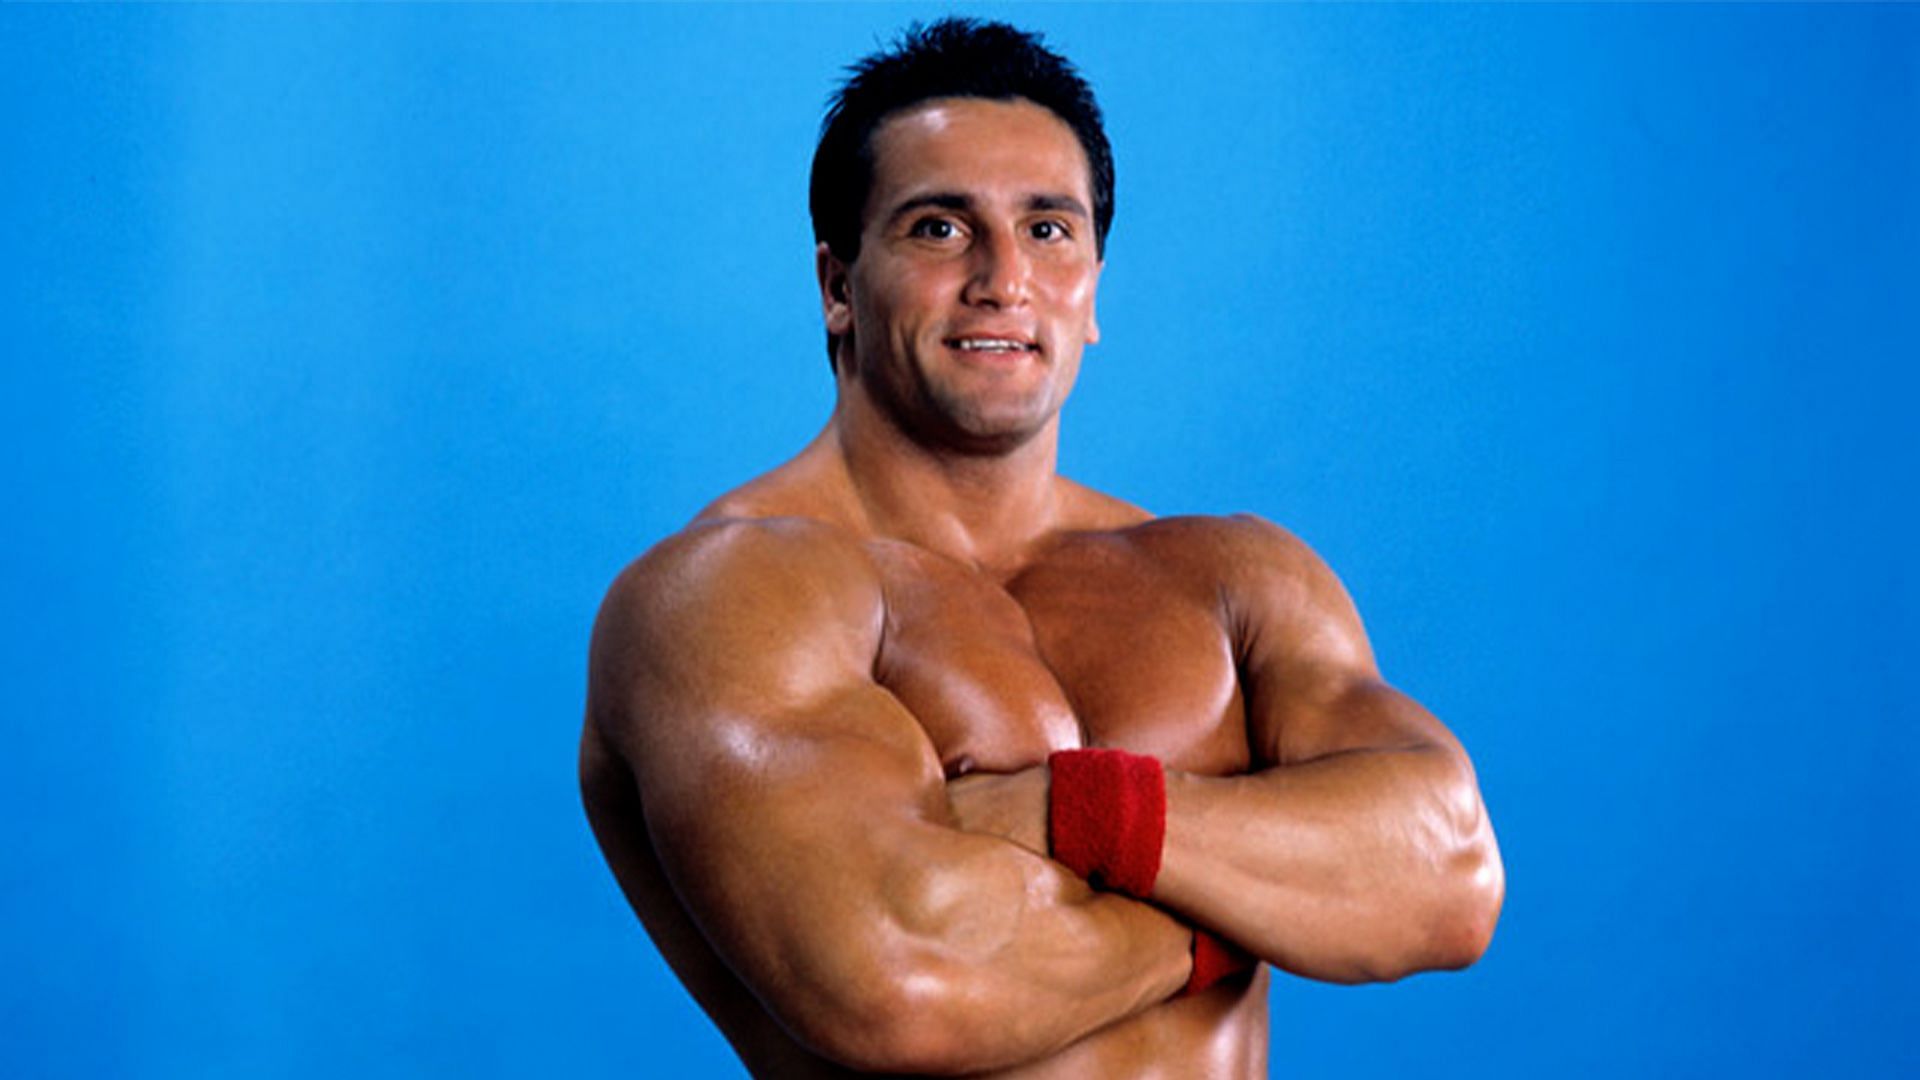 Paul Roma competed in both WWE and WCW during his professional wrestling career